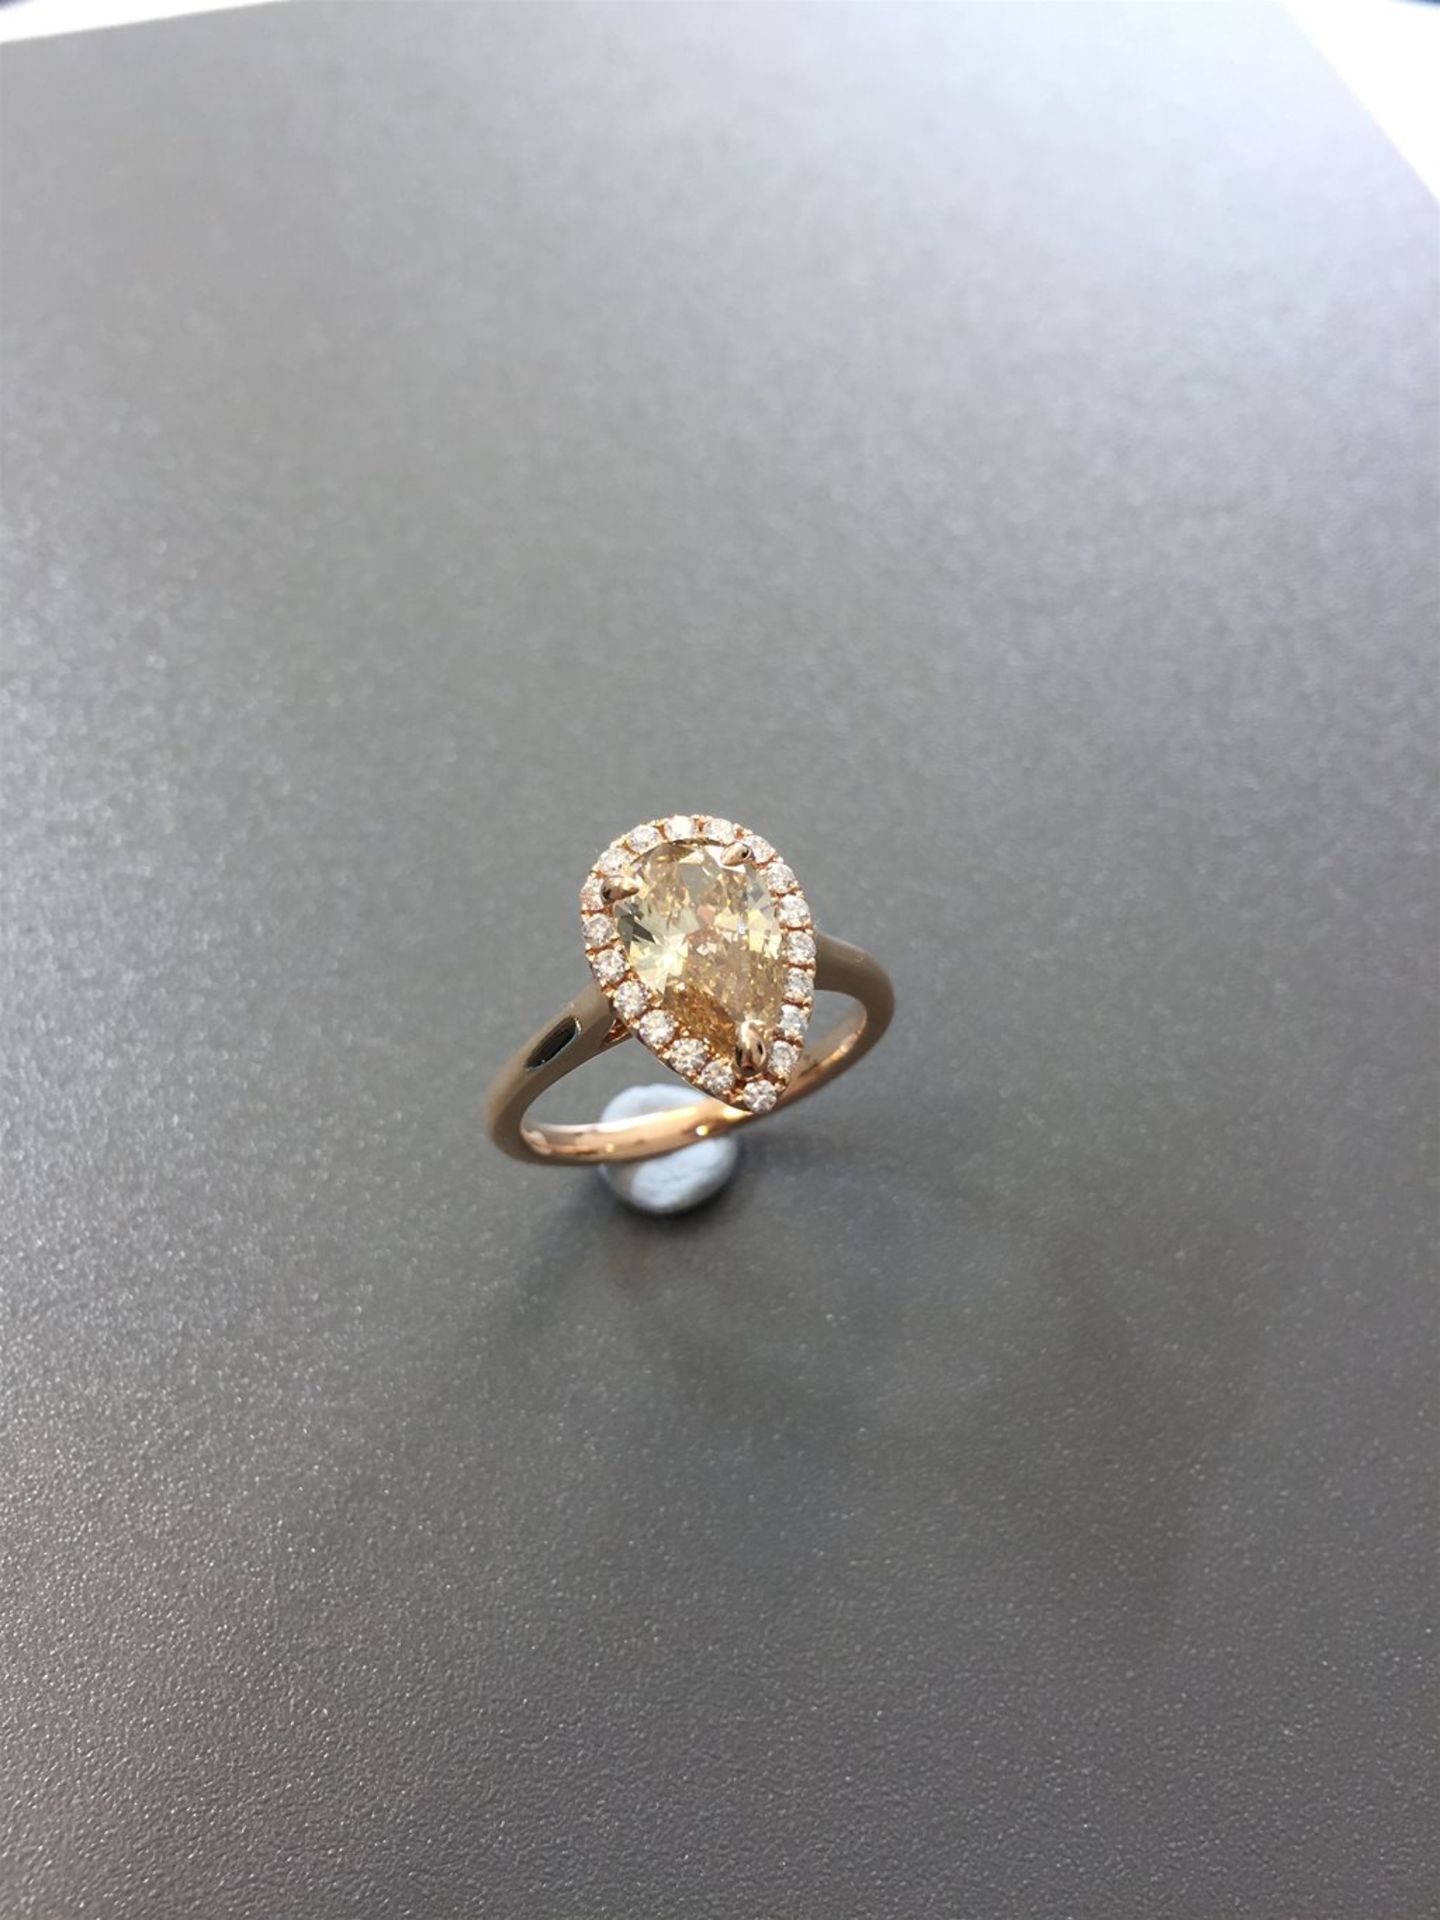 1.47ct pear shaped diamond set ring. Fancy yellow pear diamond, I1 clarity. Set in platinum. GIA ce - Image 2 of 5